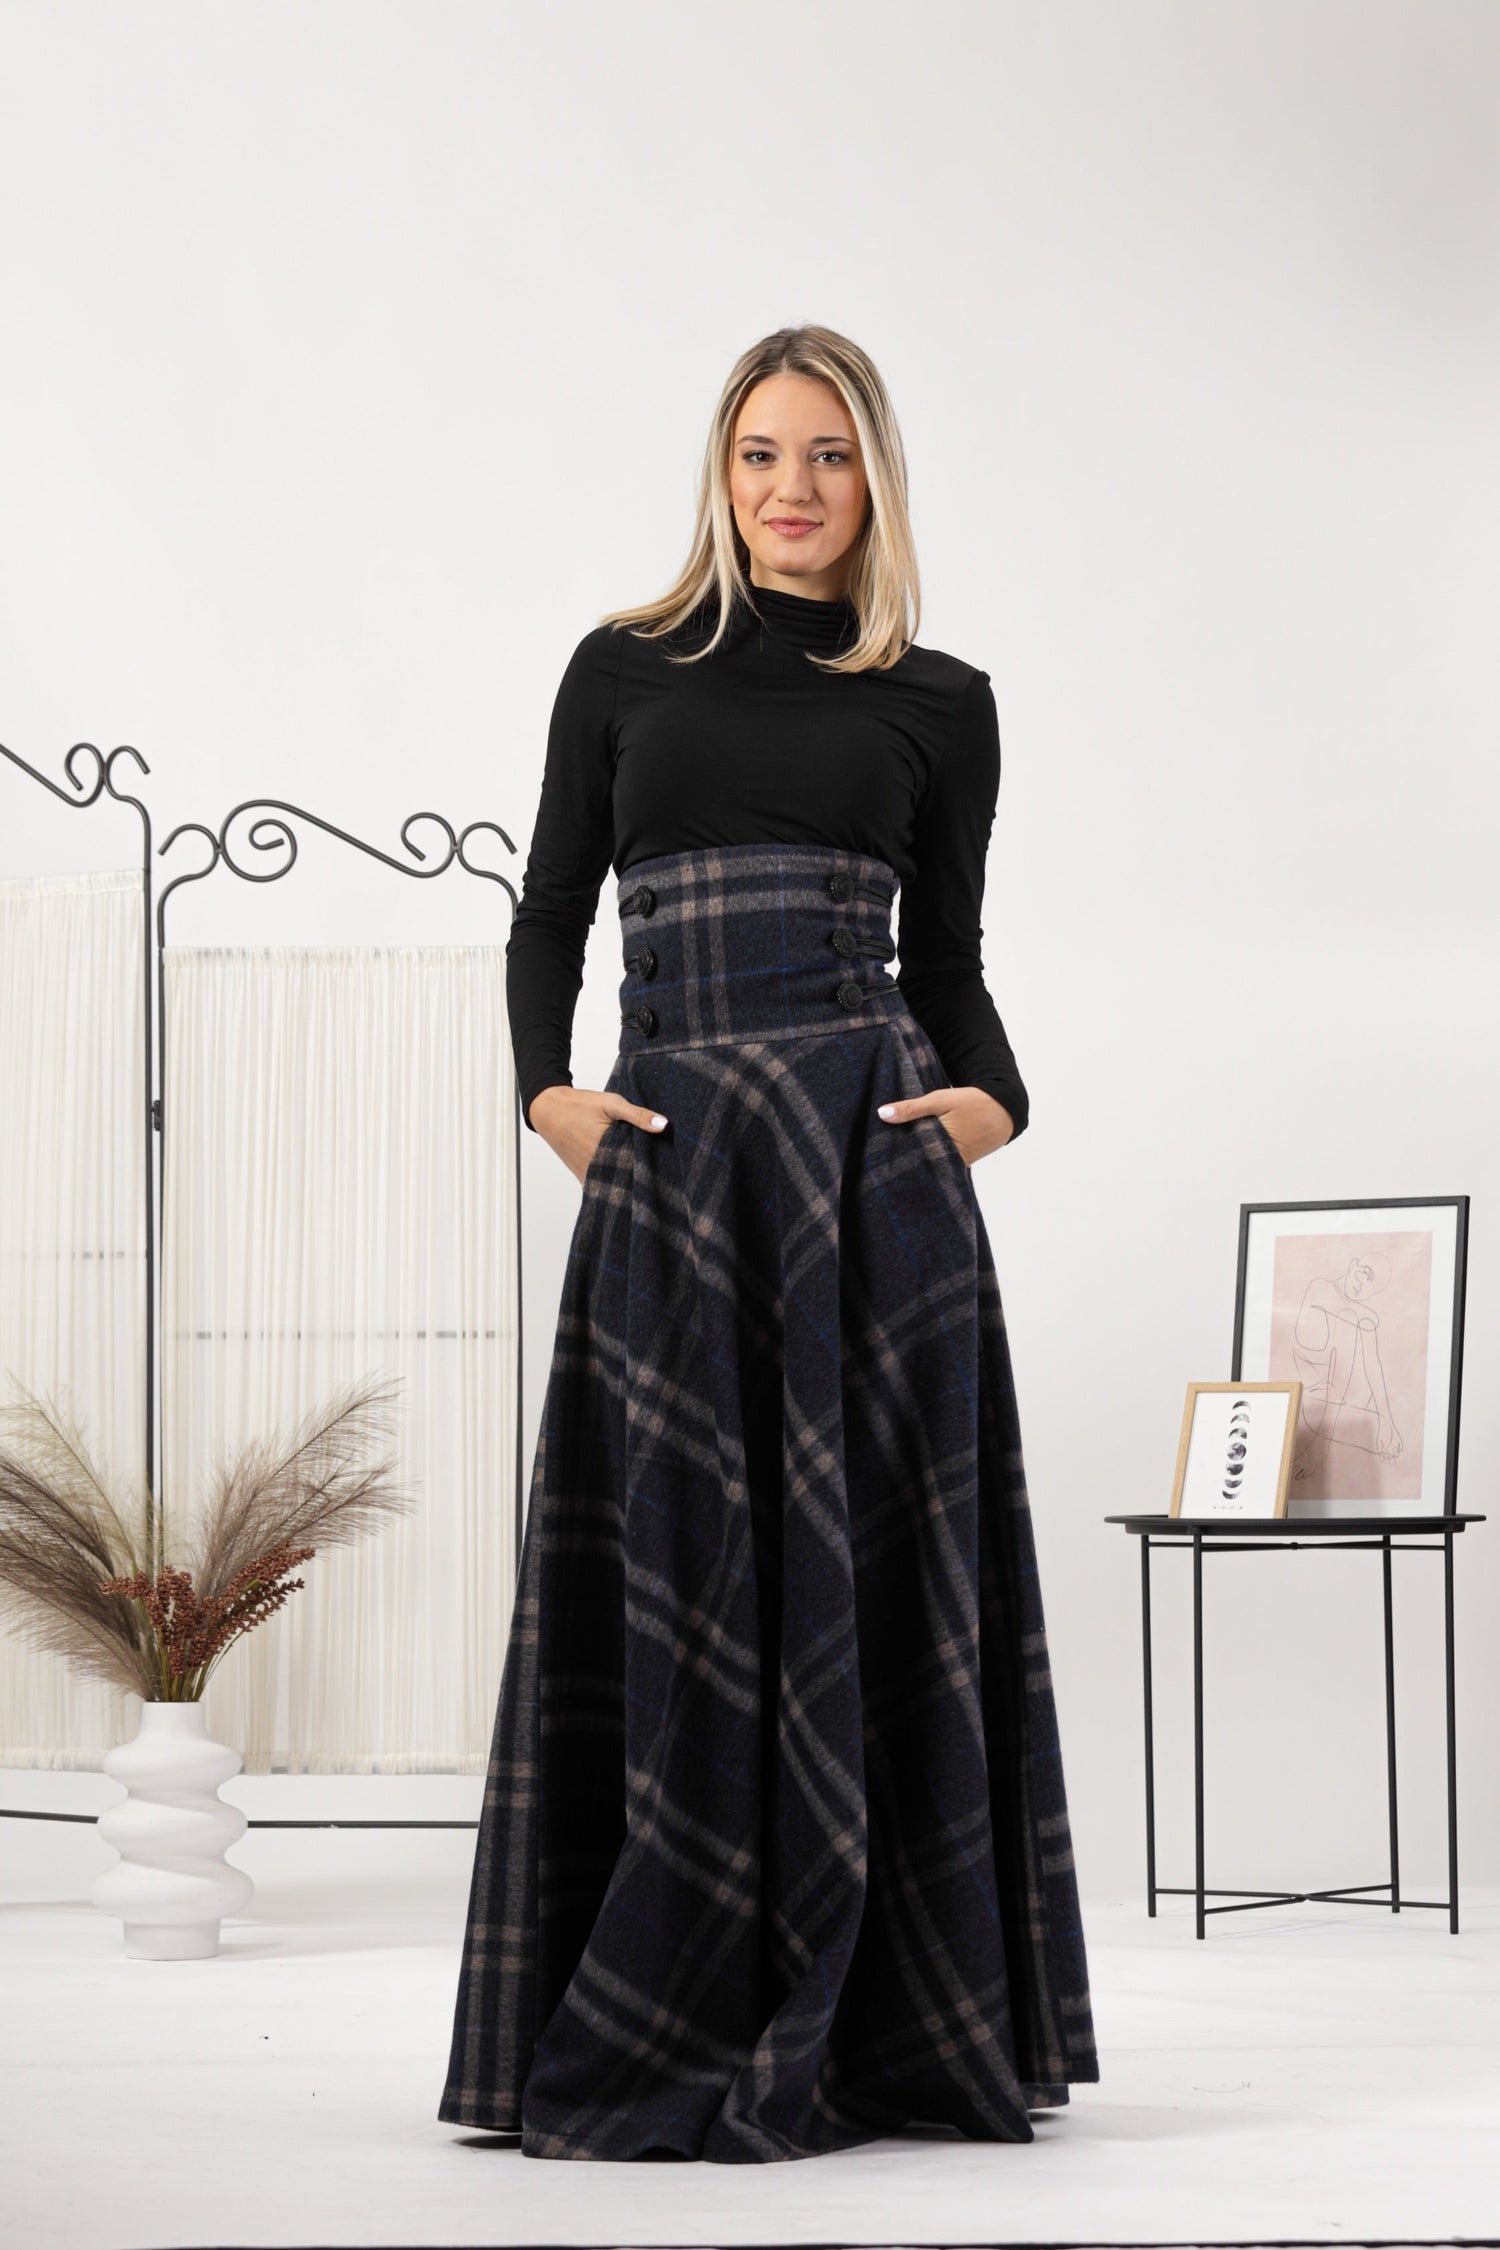 Wool skirts collection at Nikka Place